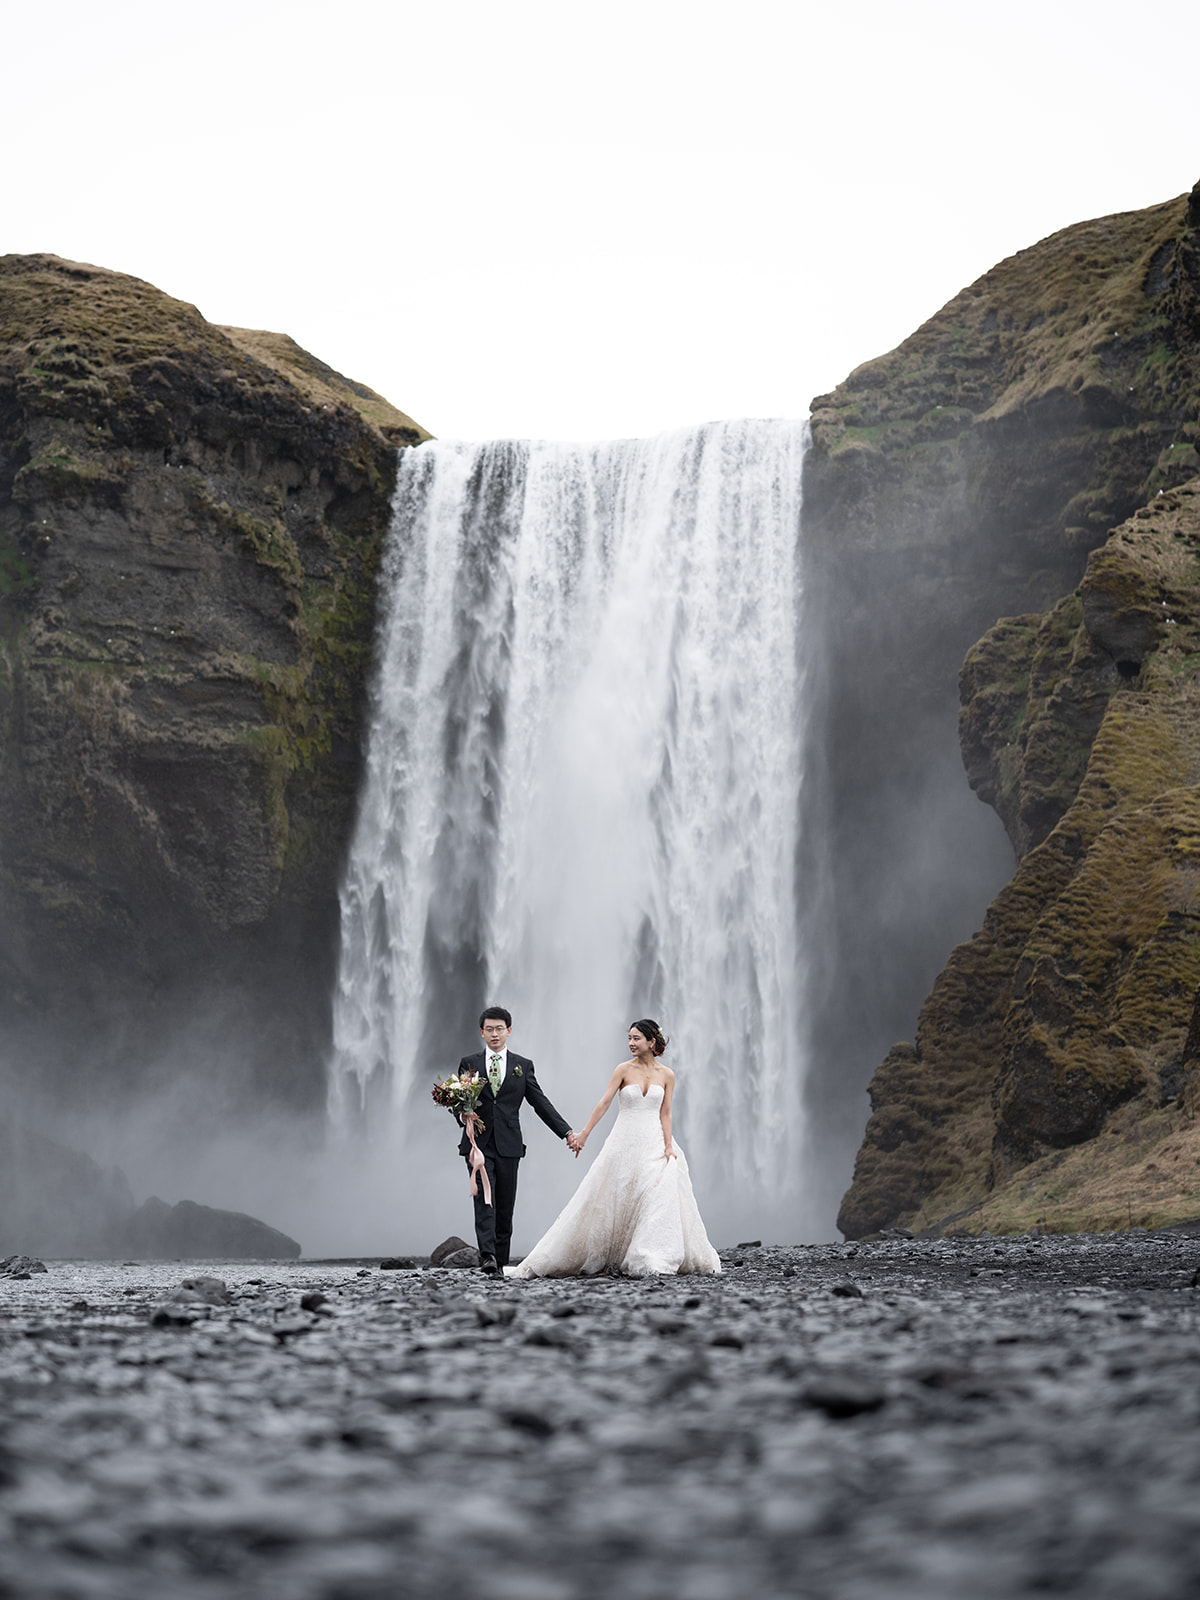 Elopement pictures at Skogafoss waterfall Iceland 